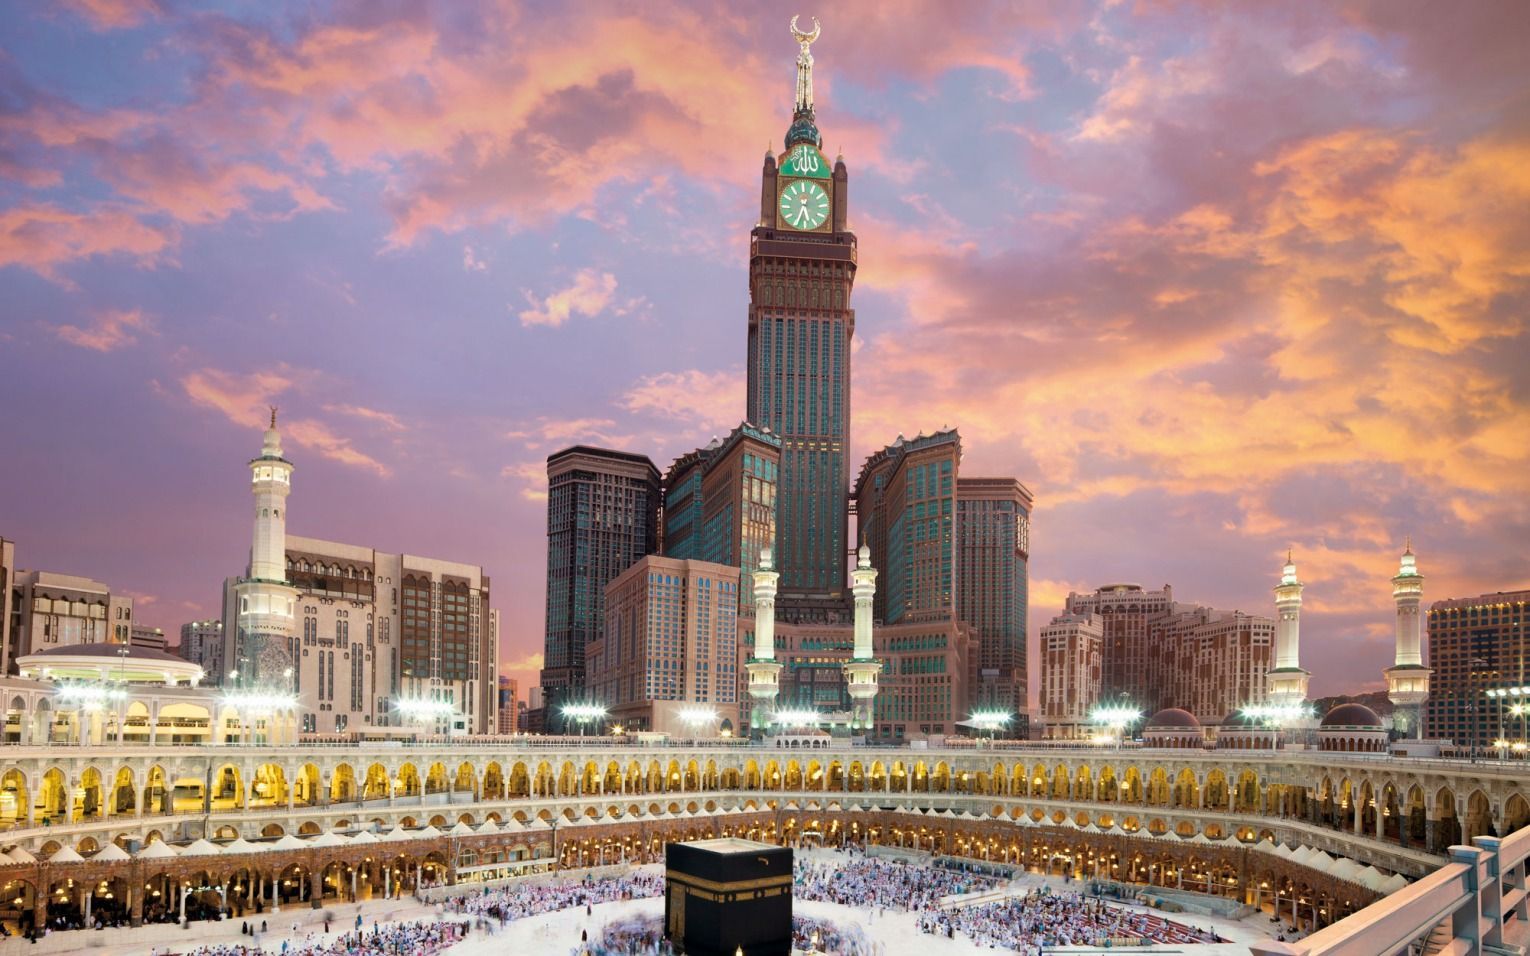 Tallest Buildings in the World. Mecca wallpaper, Mecca kaaba, Mecca